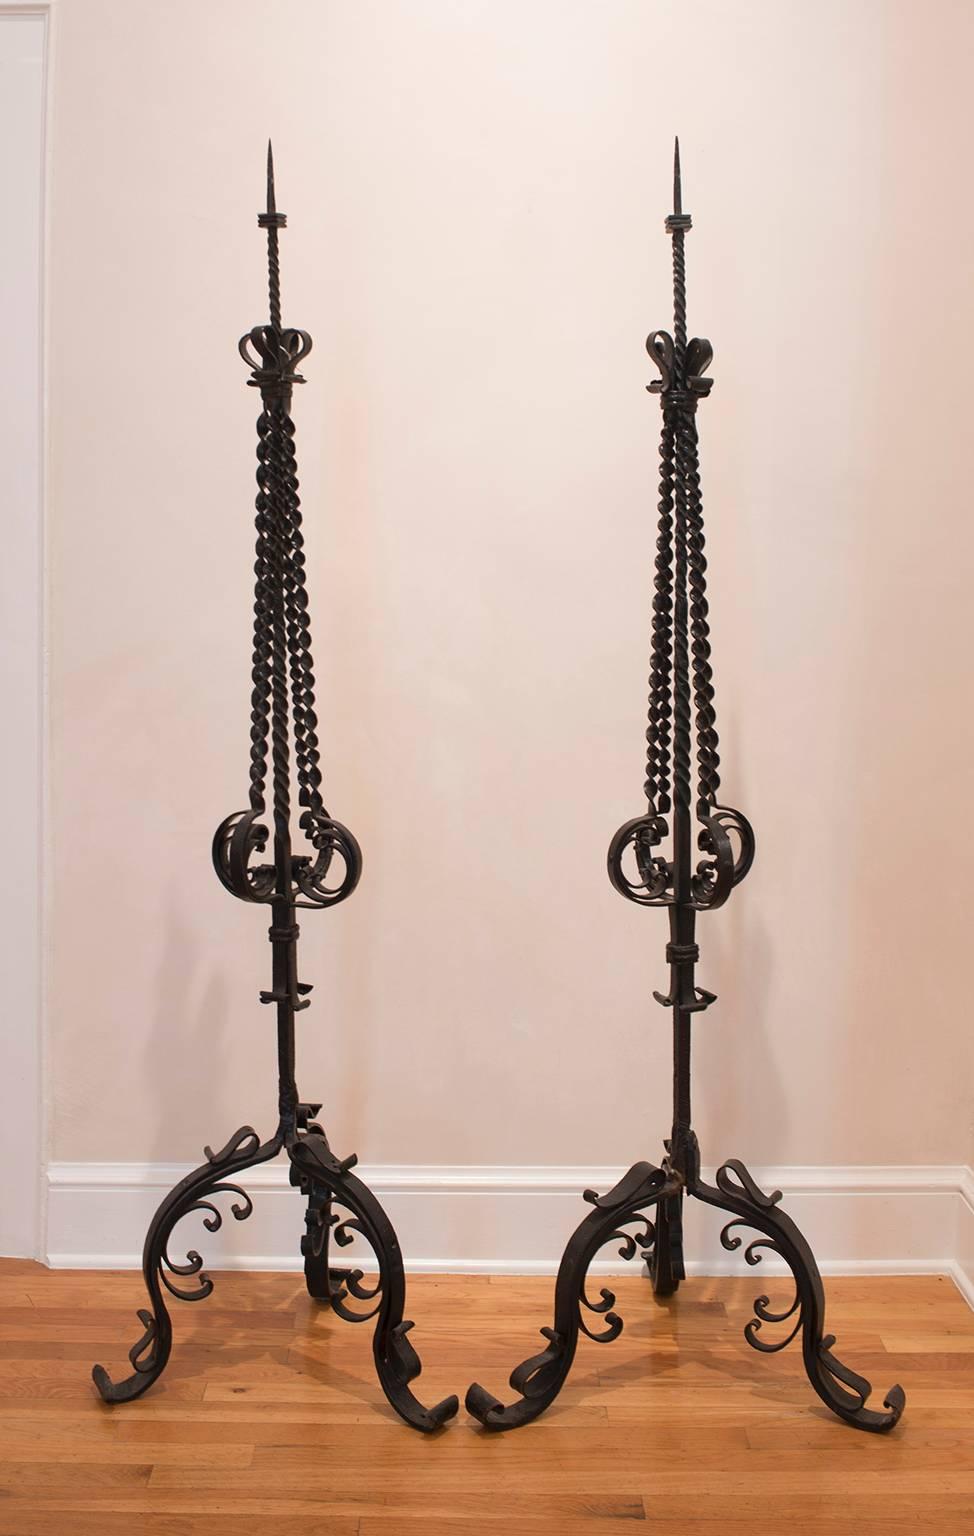 Hand-forged iron torchieres with elaborate ornamentation